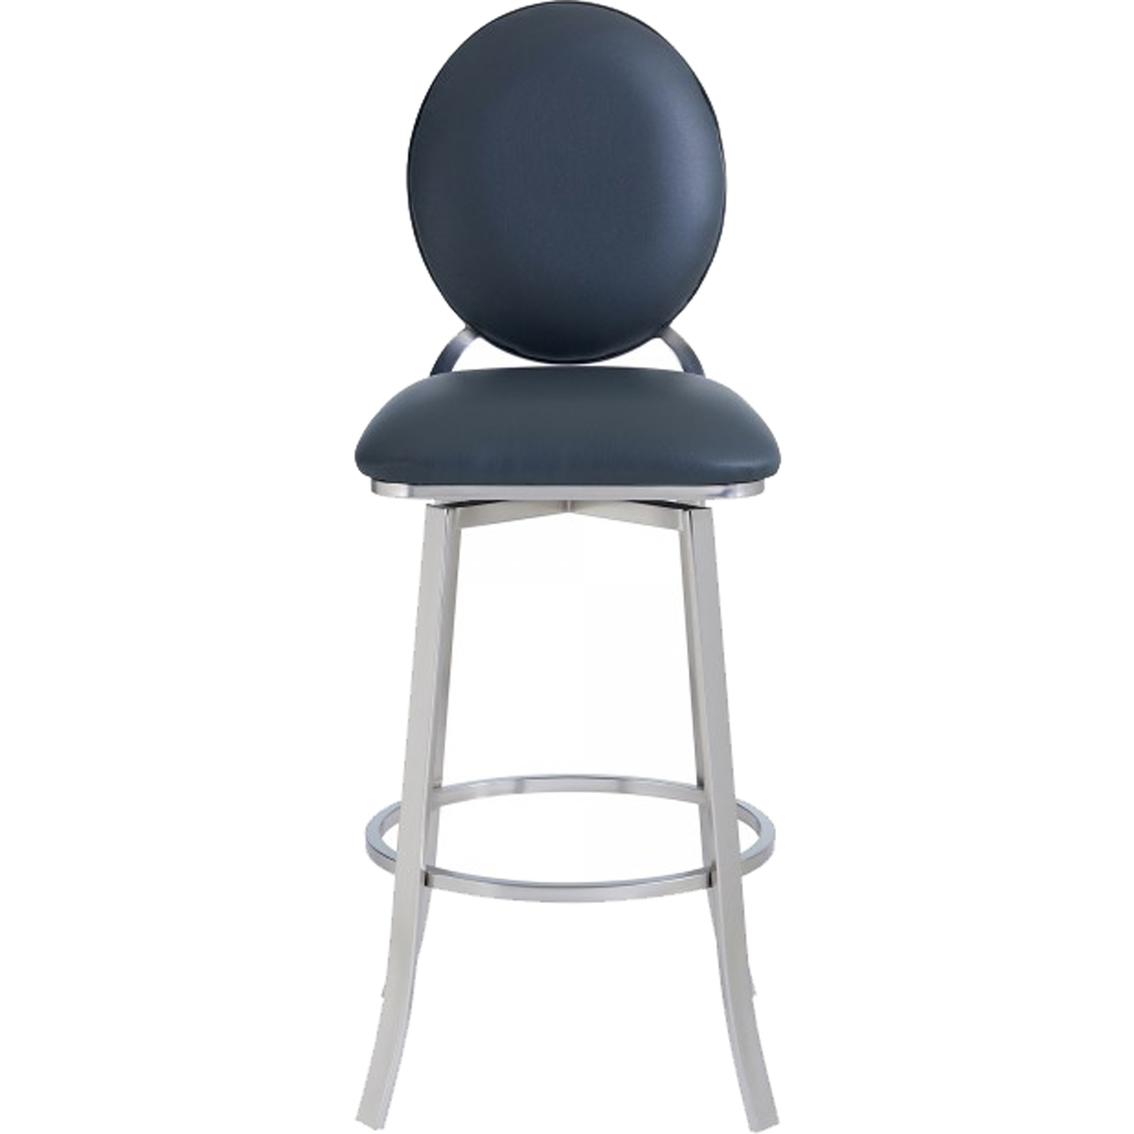 Armen Living Pia Barstool in Brushed Stainless Steel Finish and Grey Faux Leather - Image 2 of 7